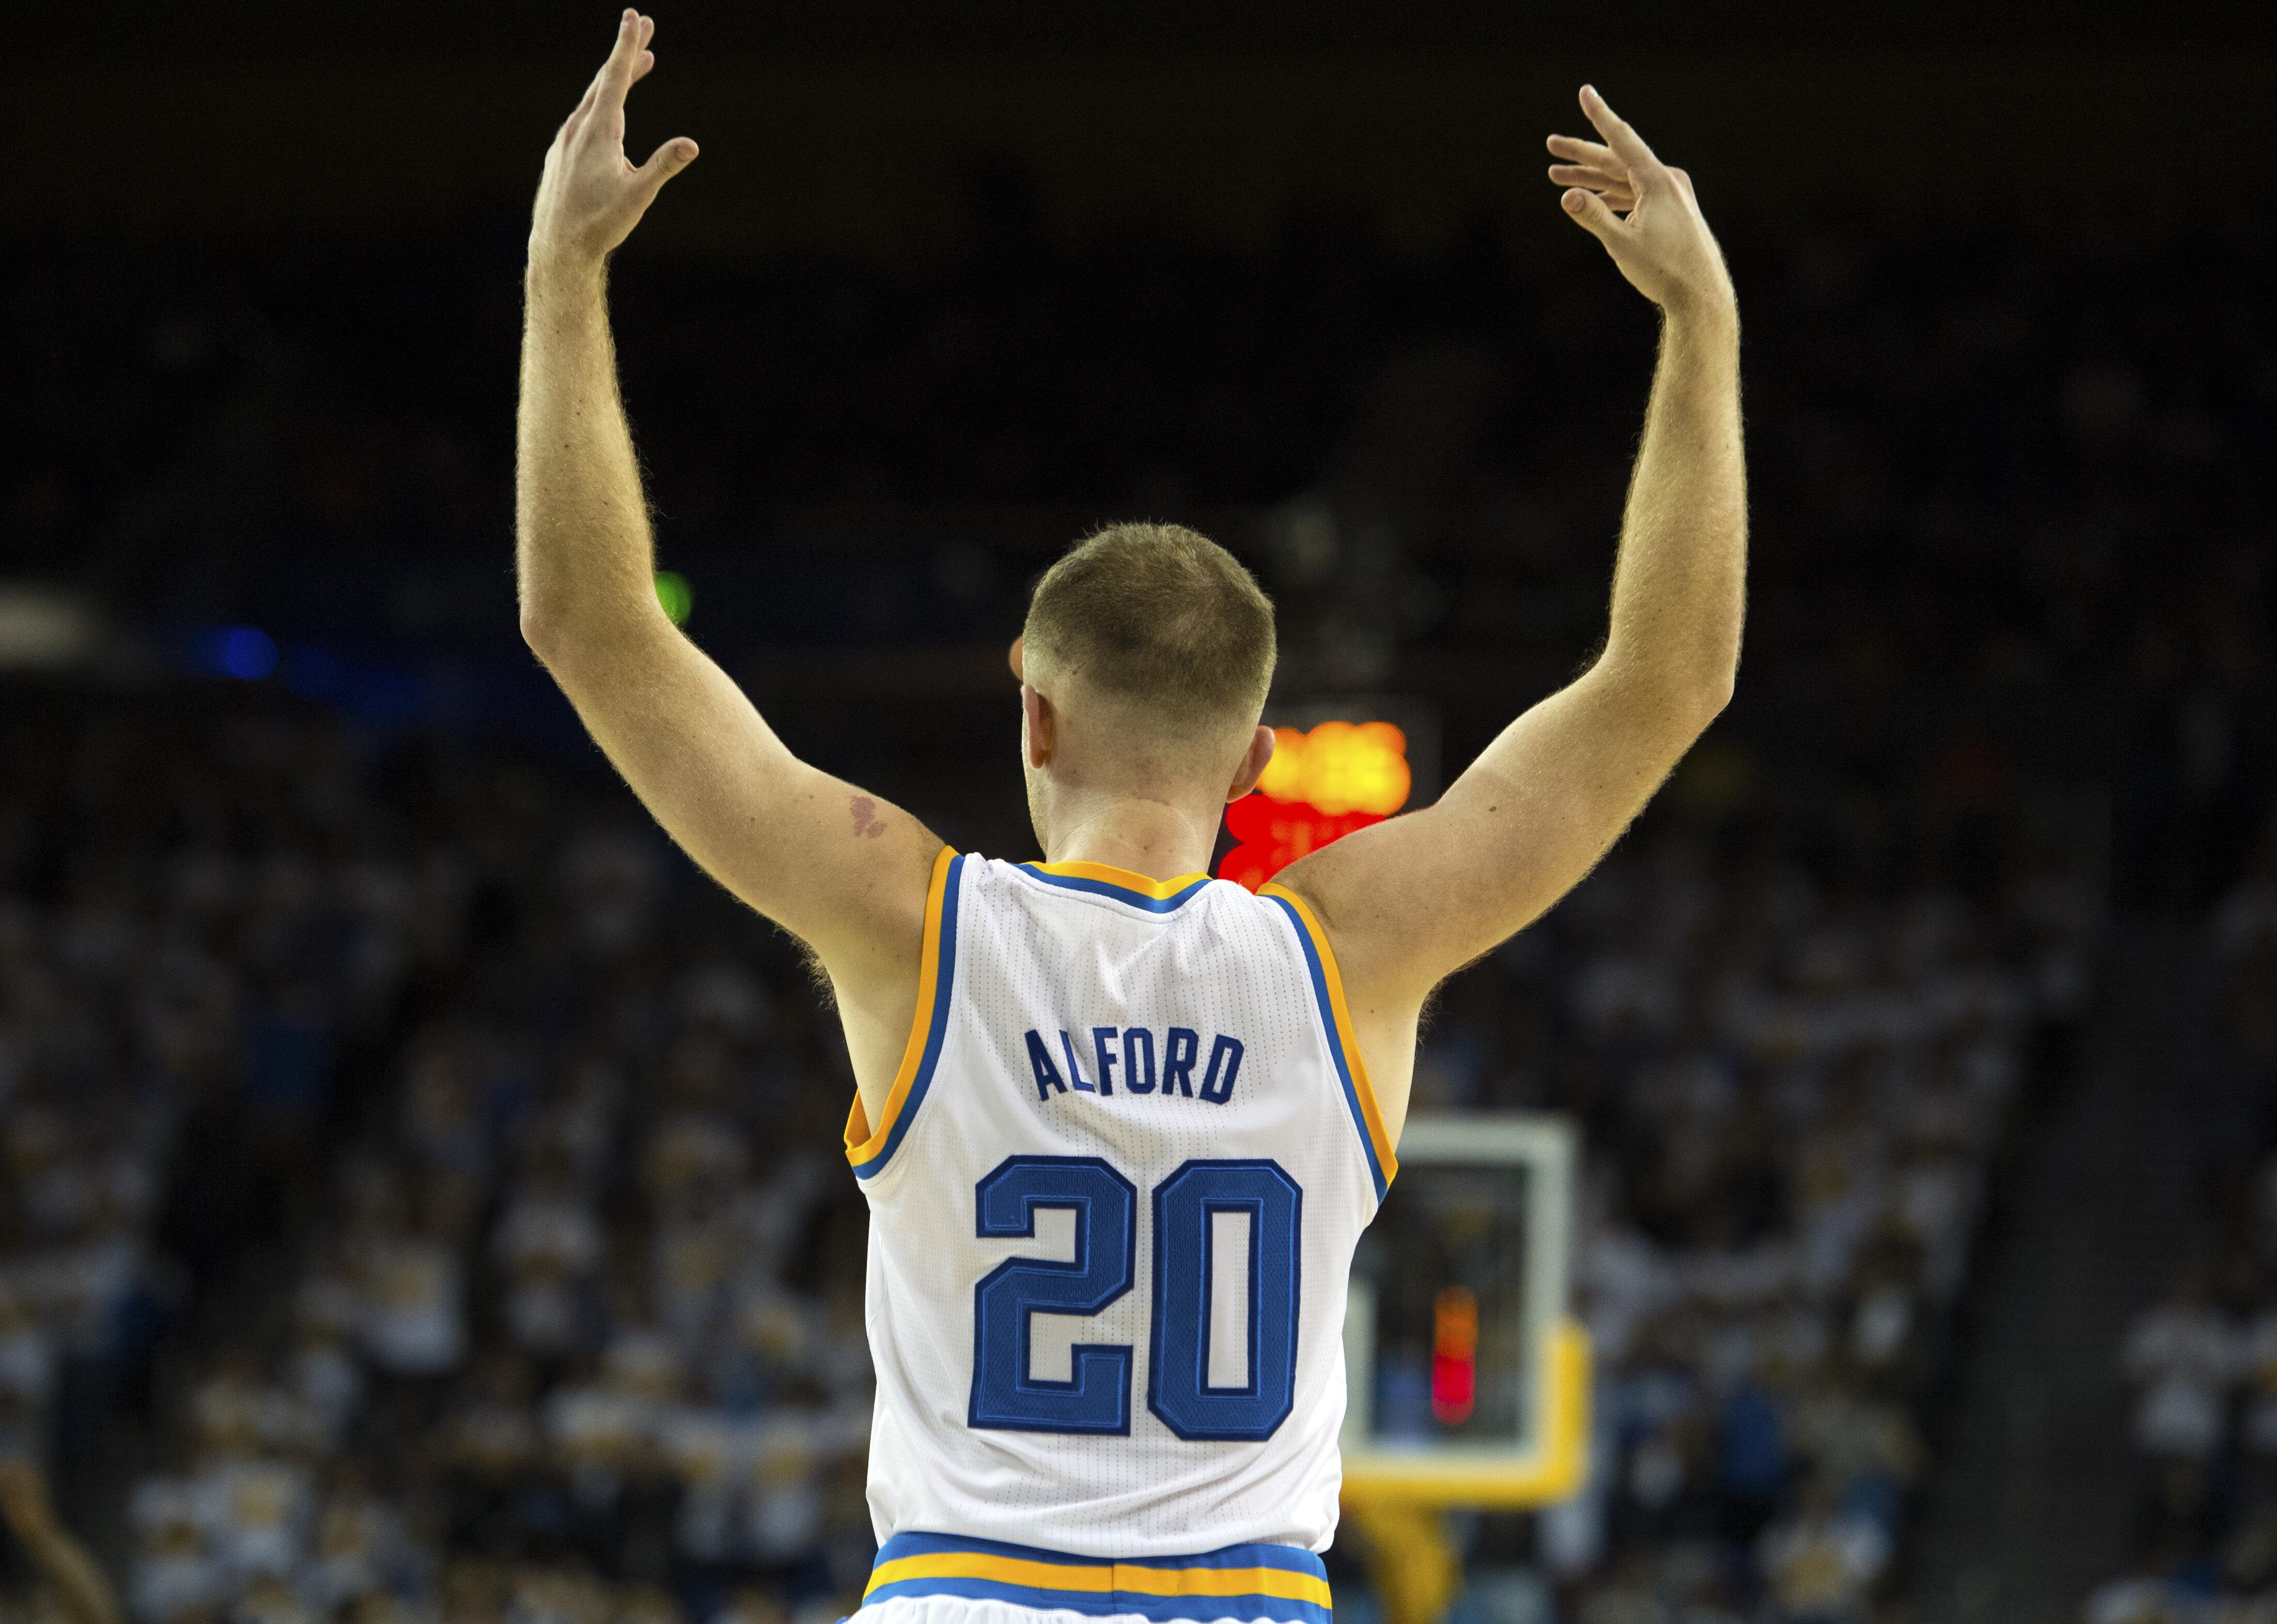 LOS ANGELES, CA - FEBRUARY 9:  Bryce Alford #20 of the UCLA Bruins celebrates making a basket against  the Oregon Ducks at Pauley Pavilion on February 9, 2017 in Los Angeles, California.  (Photo by Robert Laberge/Getty Images)